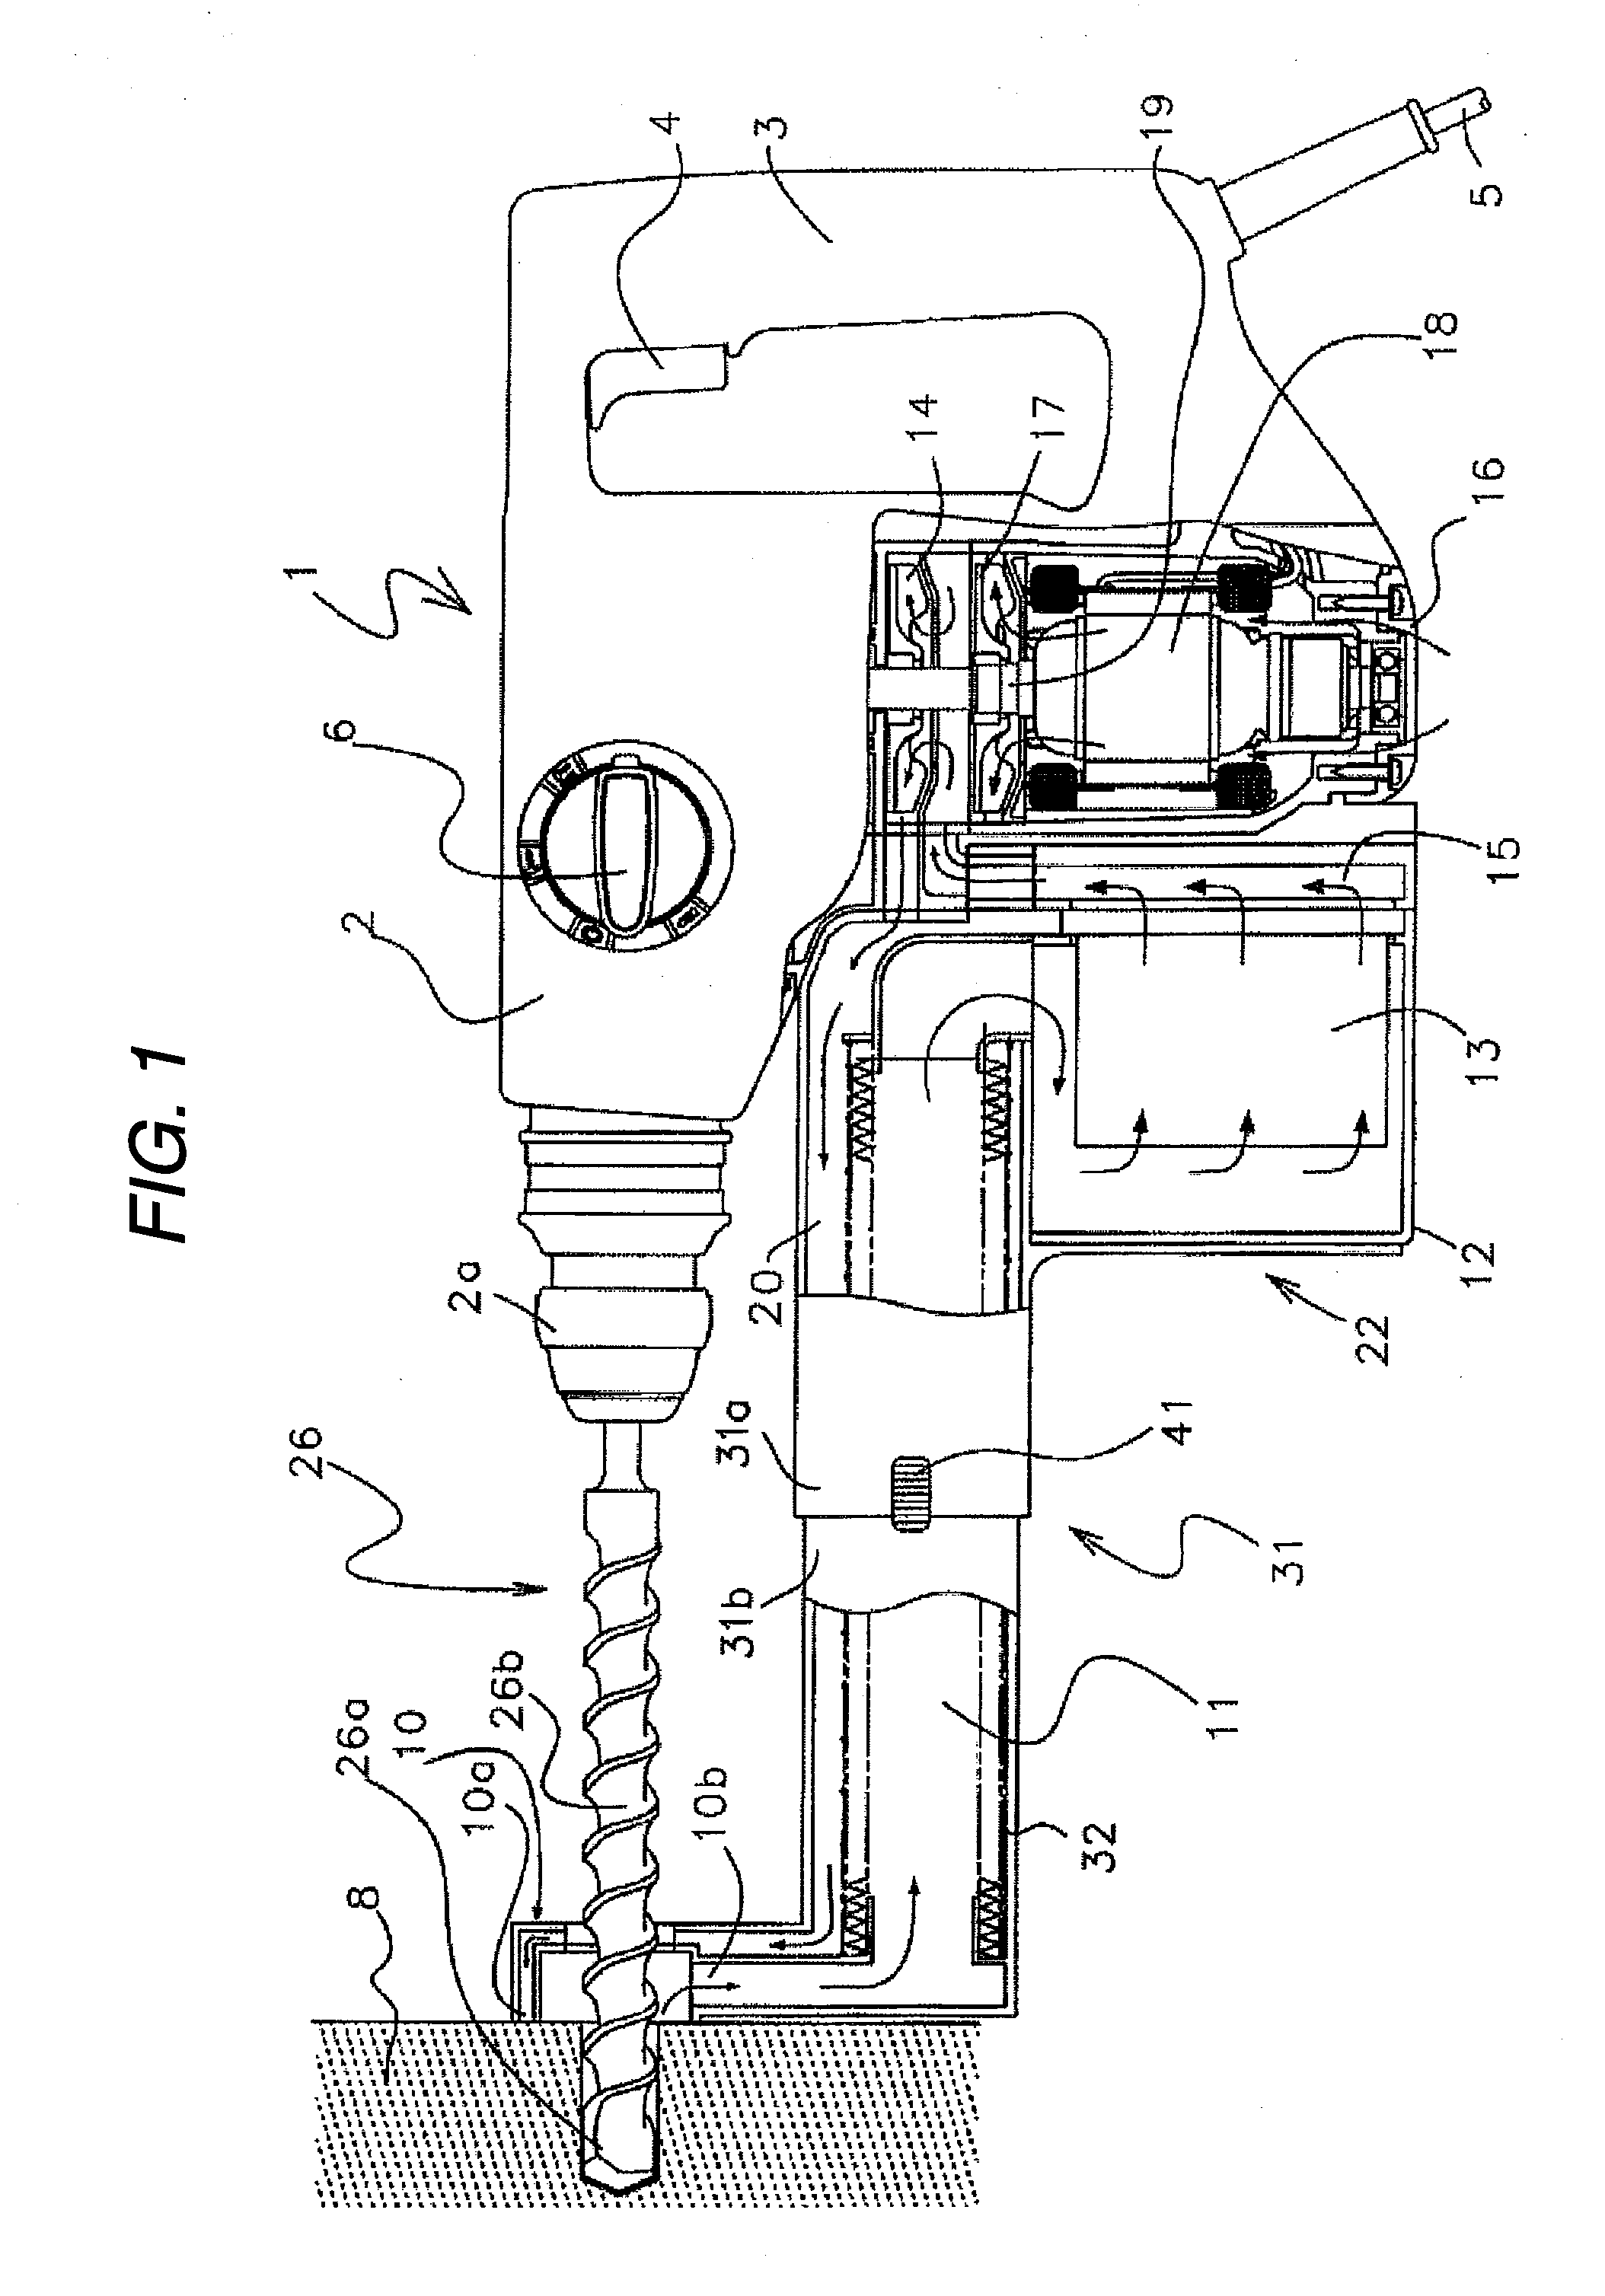 Drilling tool with dust collector